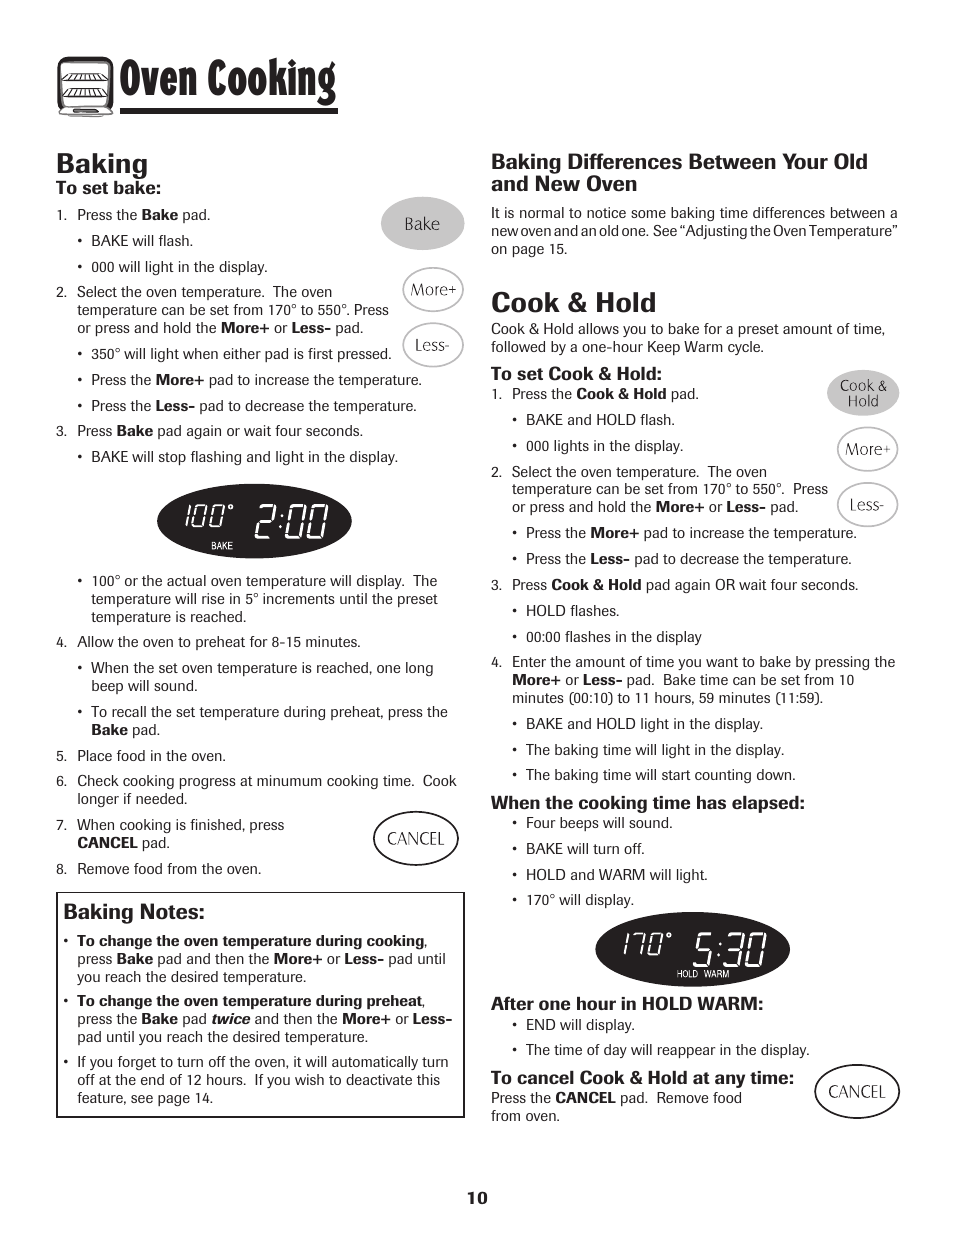 Oven cooking, Baking, Cook & hold | Baking differences between your old and new oven | Maytag MGR5775QDW User Manual | Page 11 / 84